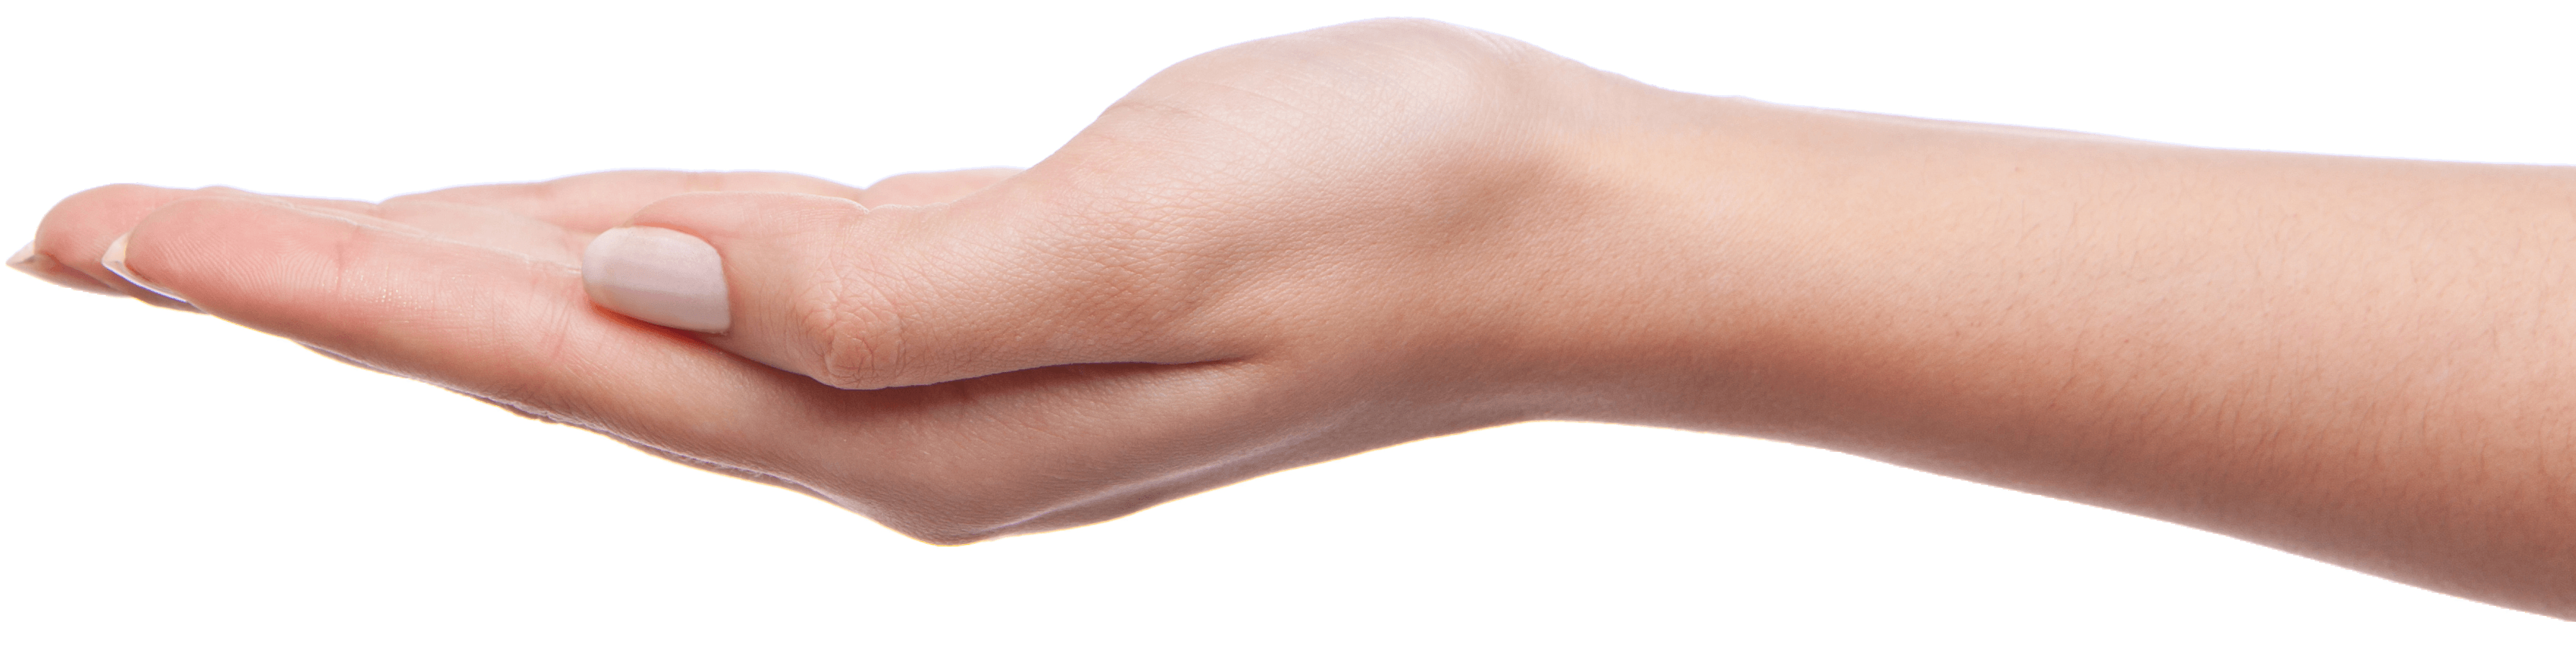 Palm Hands Png Hand Image  PNG Image